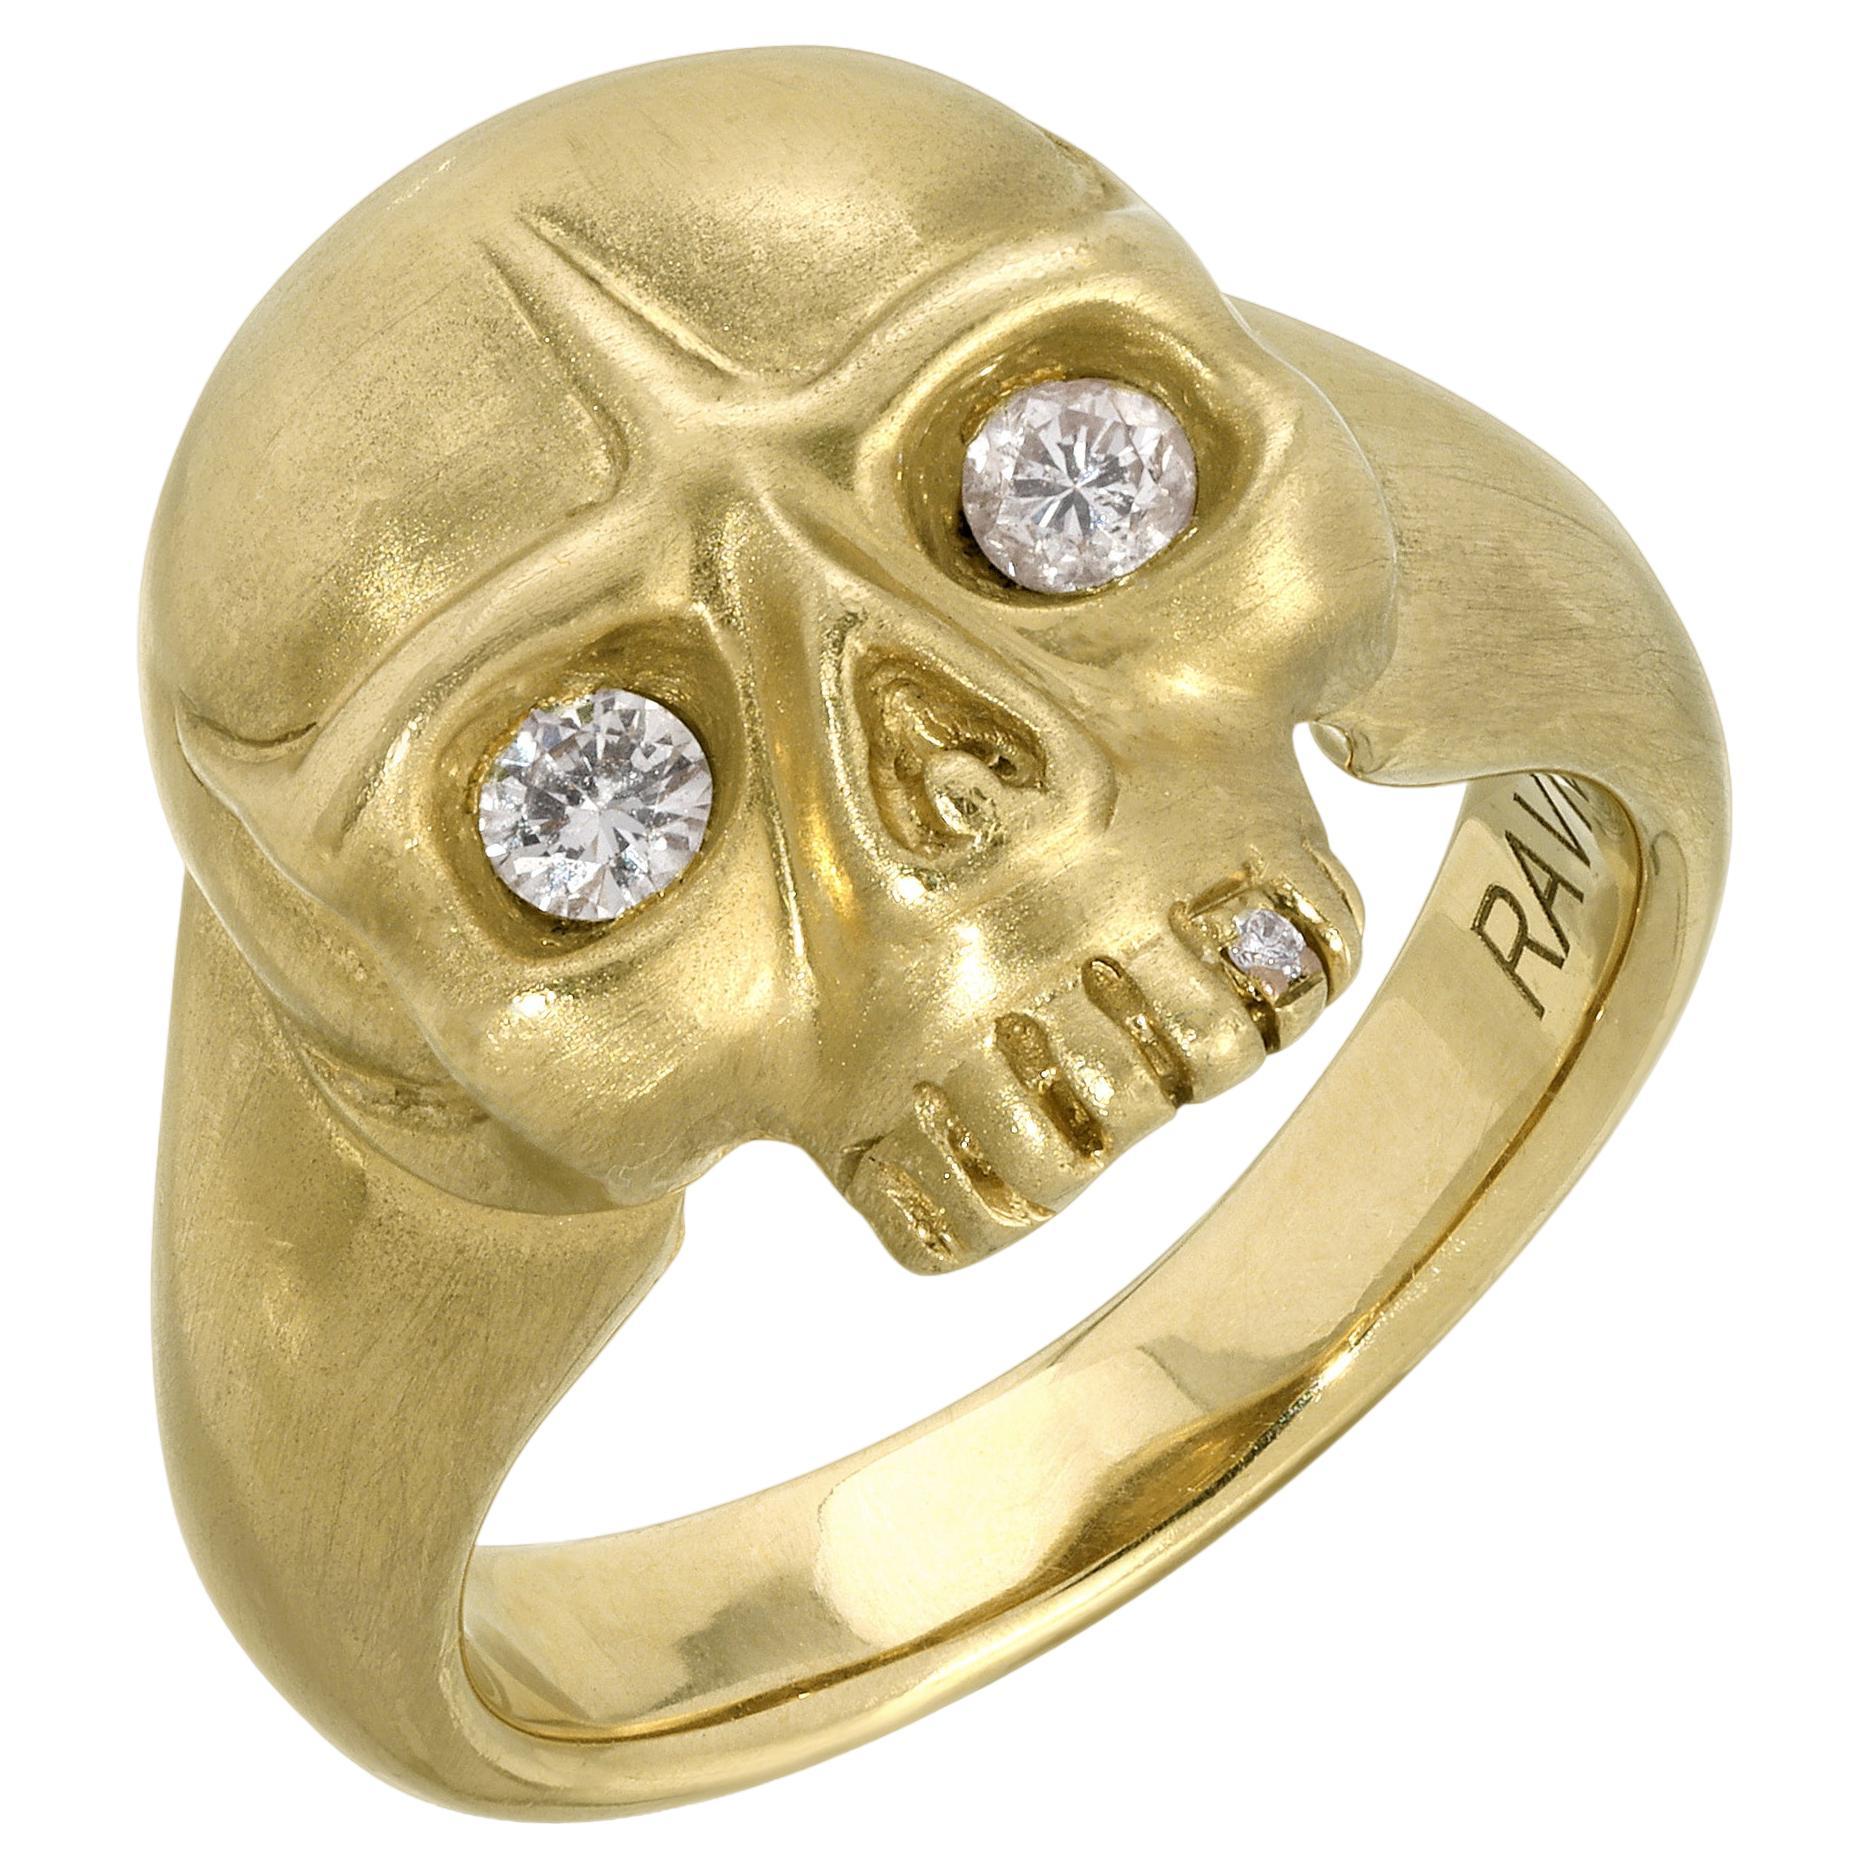 House of RAVN, 14k Gold Hand Carved Petite Skull Ring with Diamond Eyes For Sale